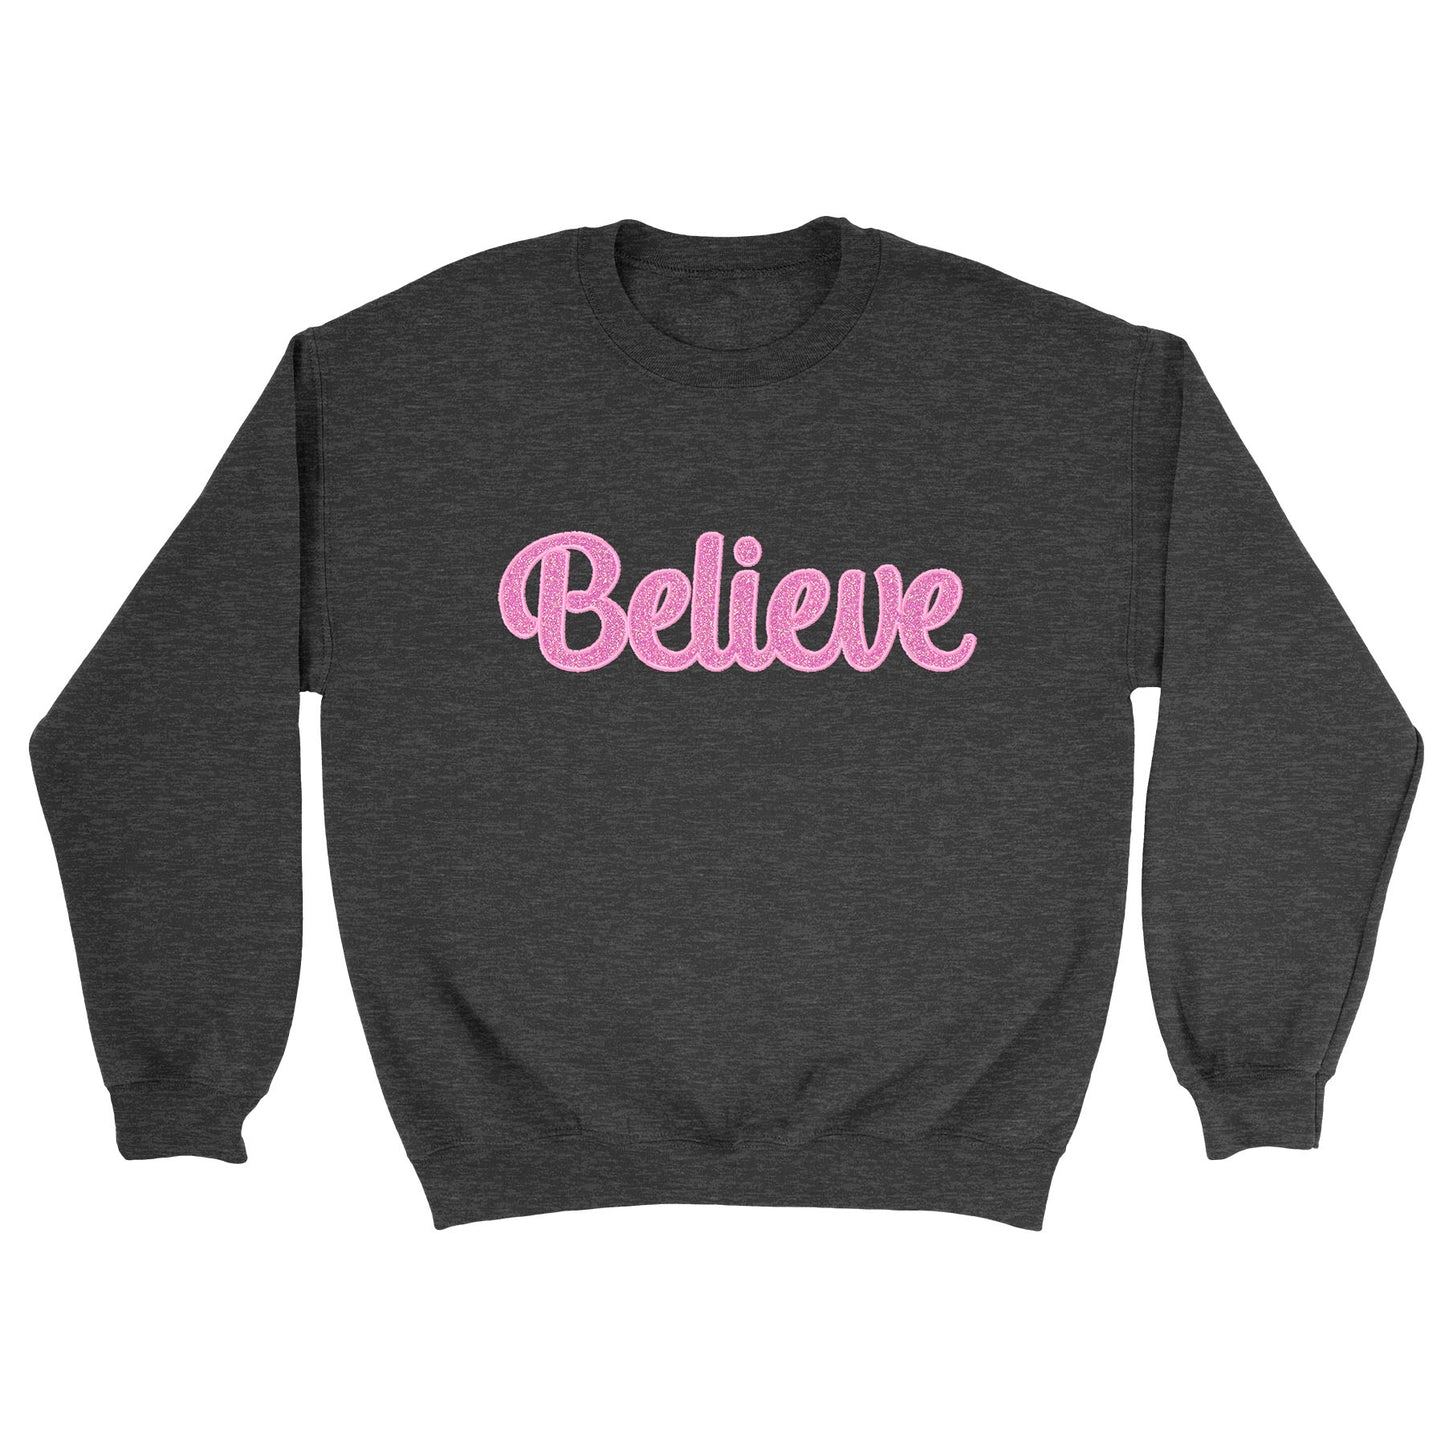 Believe and Peace GLITTER Applique Embroidered Blended Custom Shirt